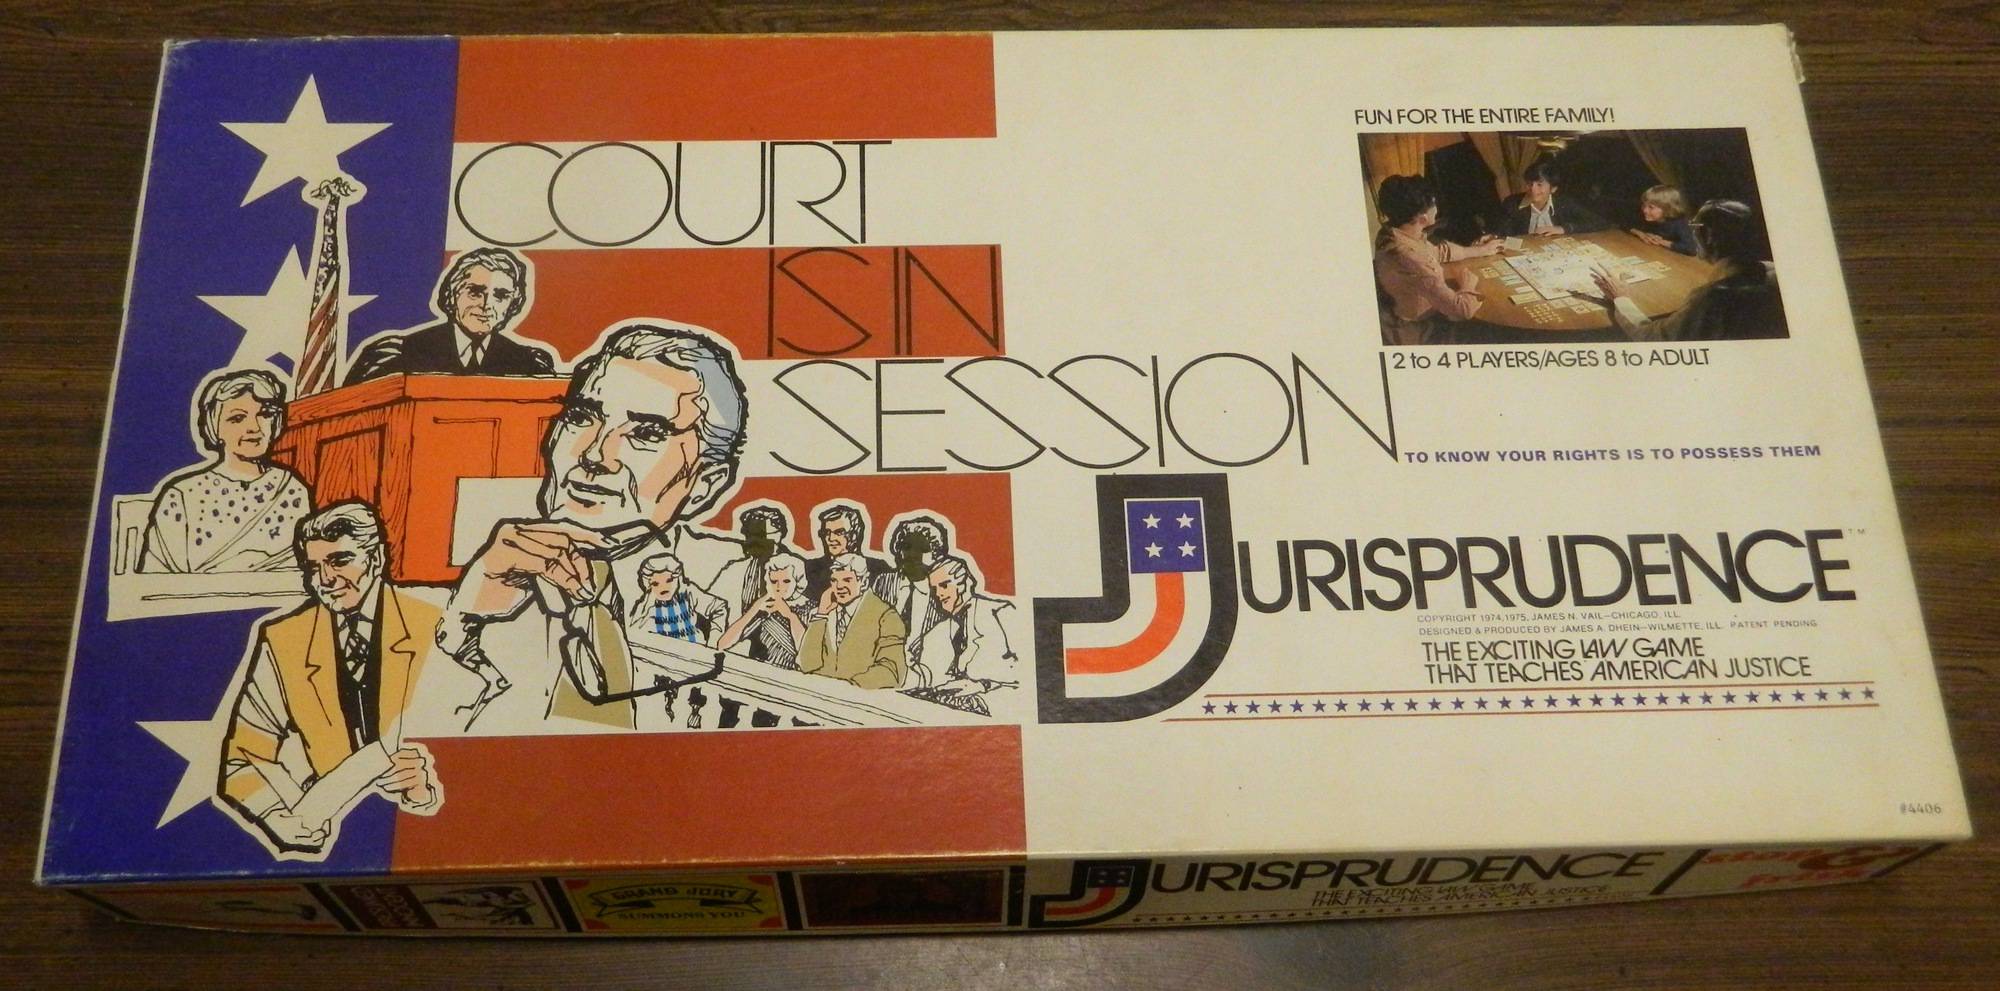 Jurisprudence AKA Trial Lawyer Board Game Review and Rules